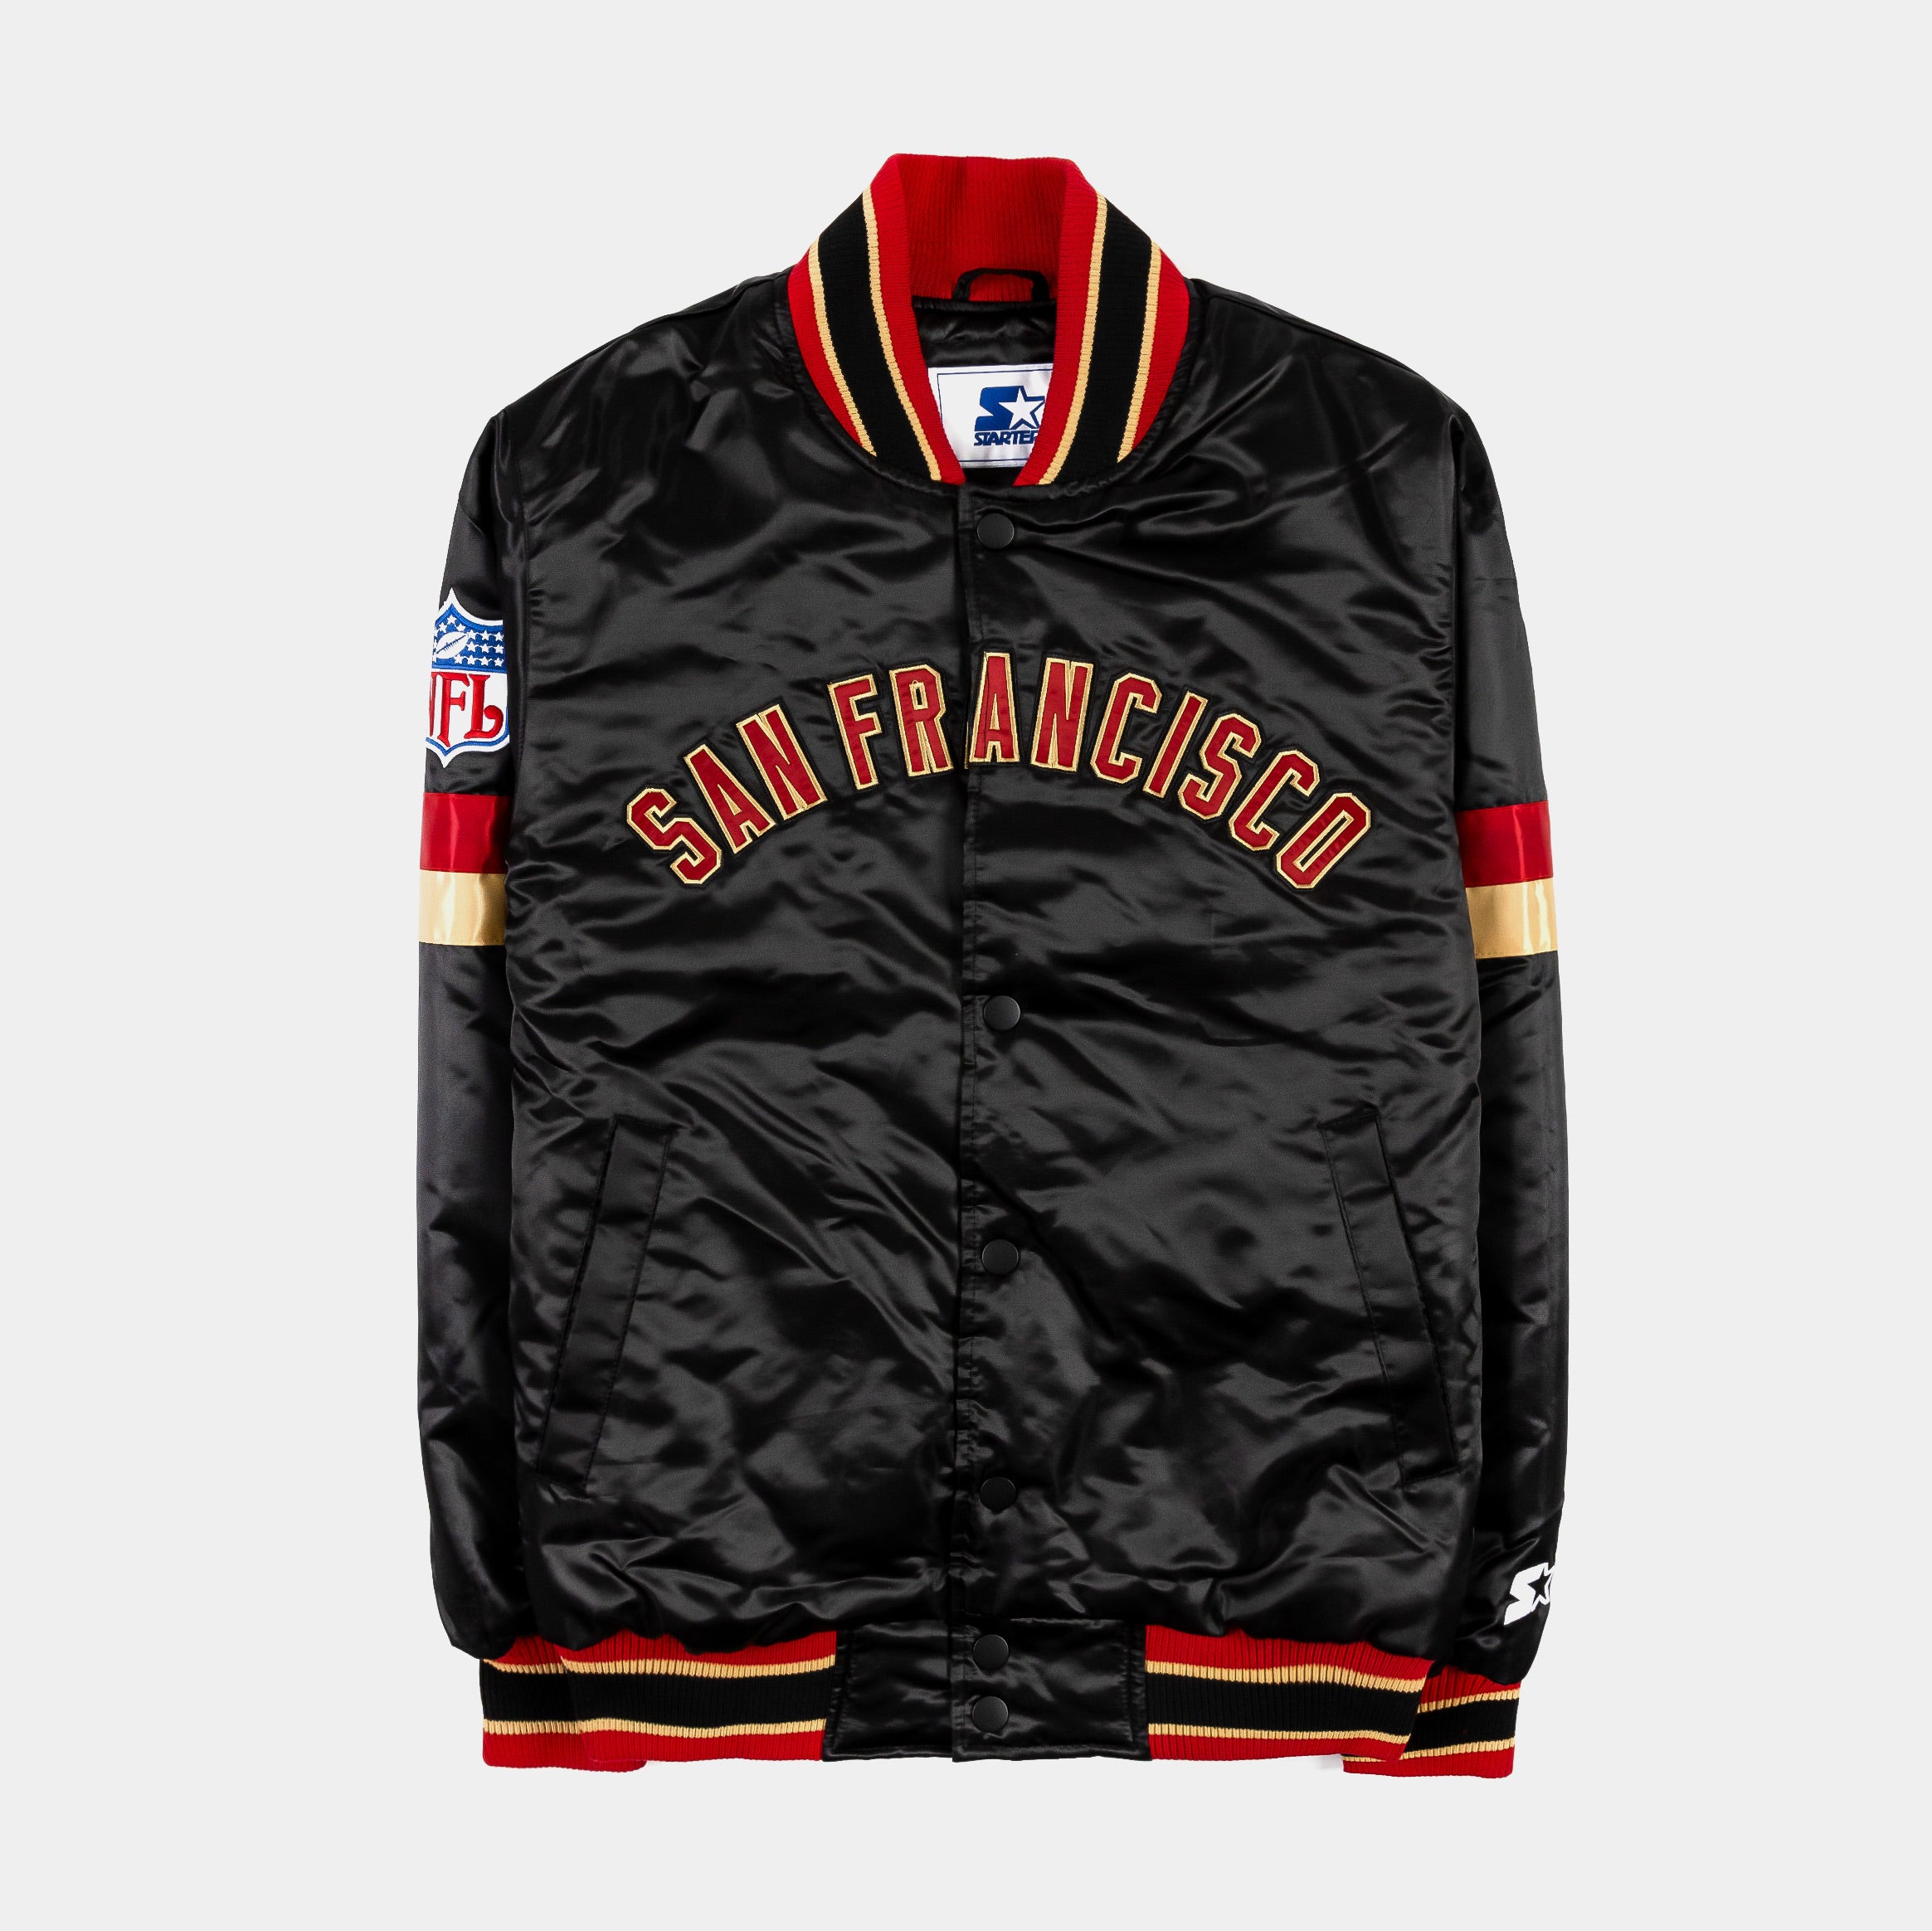 San Francisco 49ers Red and White Satin Jacket